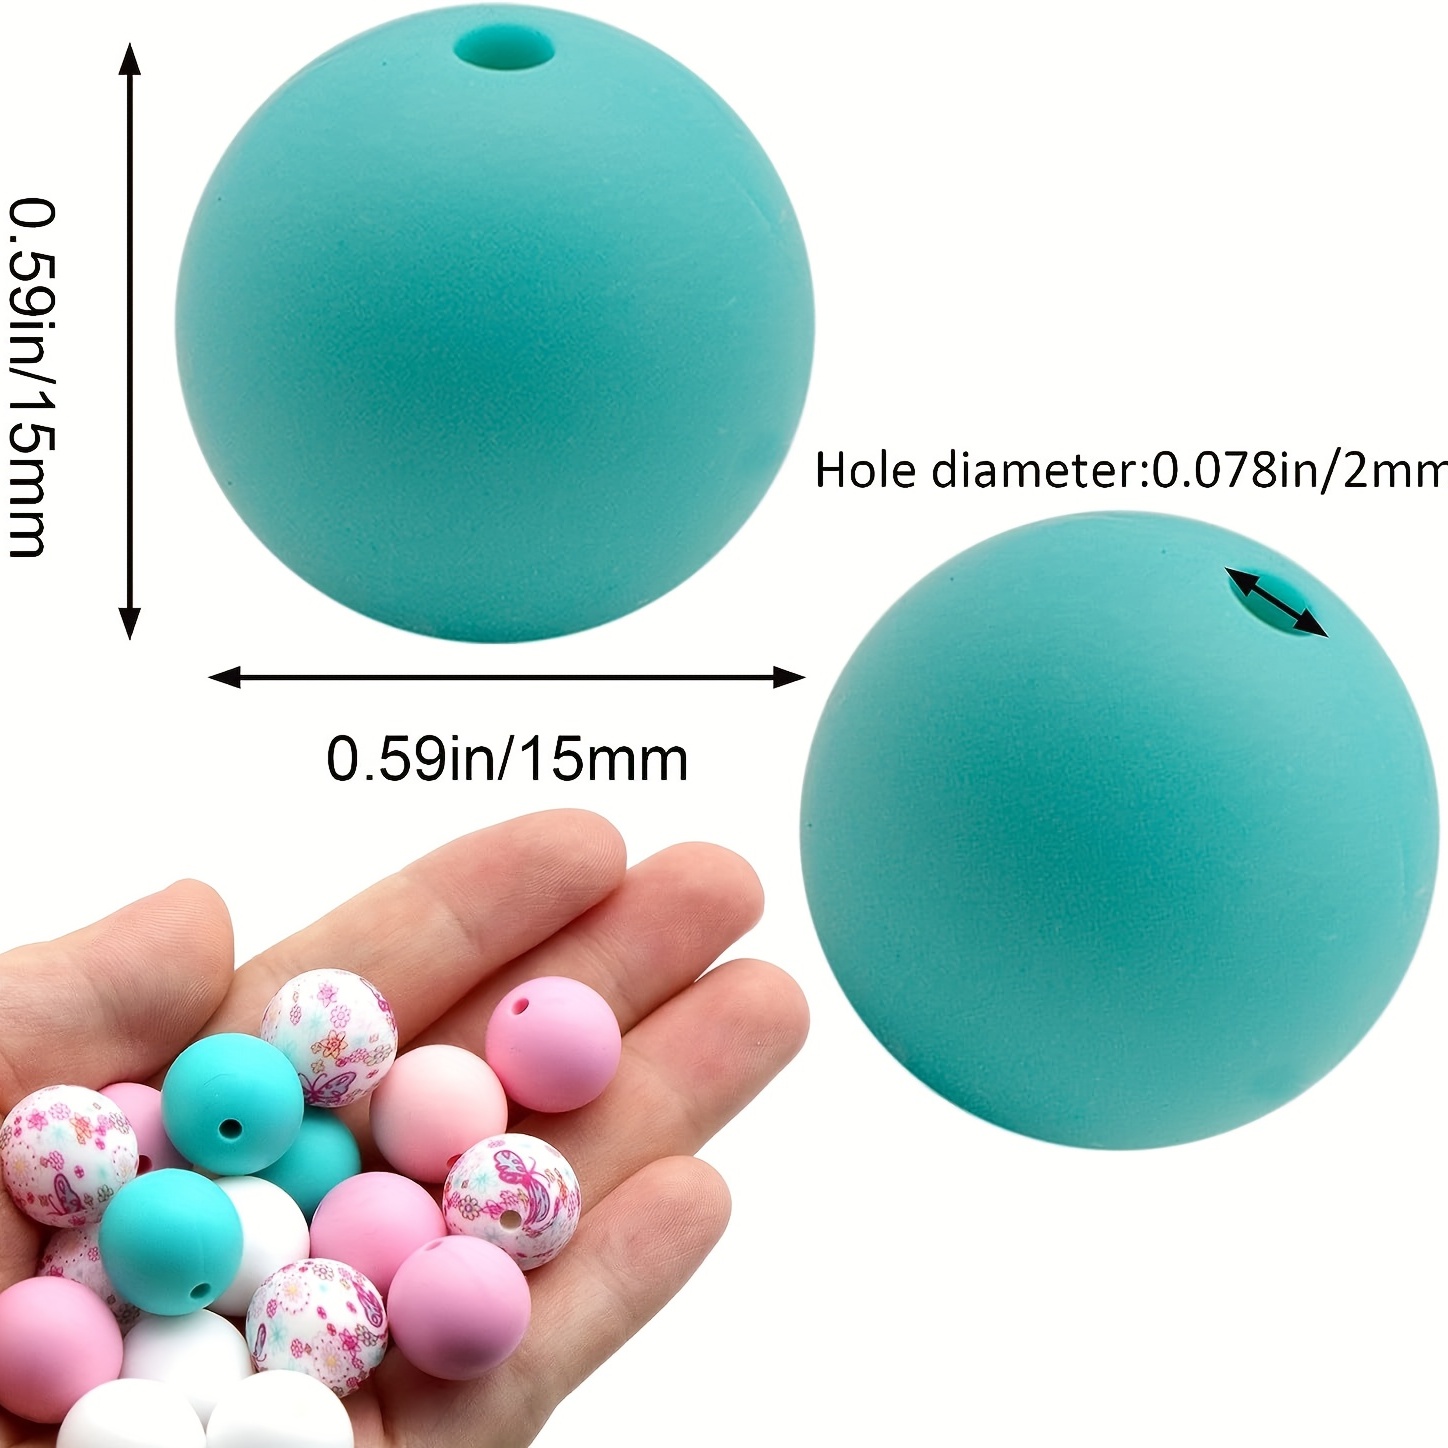 Silicone Beads for Keychain Making 15mm Rubber Beads Bulk DIY Necklace  Jewelry Beads Handmade Crafts - Mix Set 50 PCS